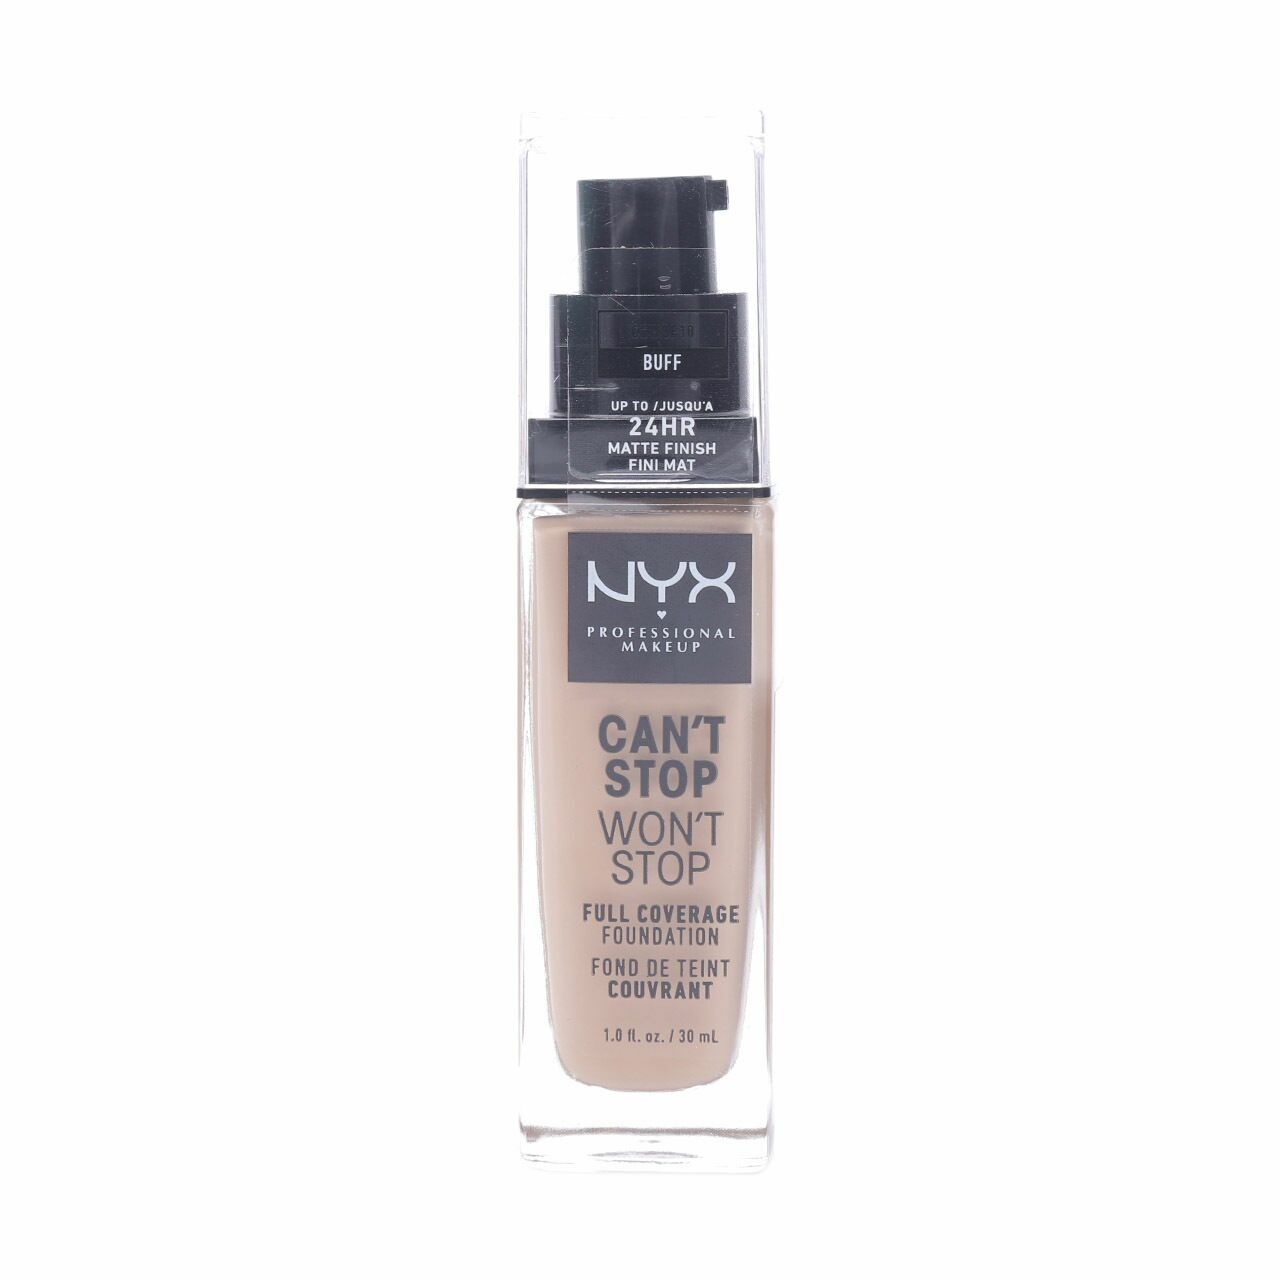 NYX Can't Stop Won't Stop Full Coverage Foundation 24HR Matte Finish #Buff Faces